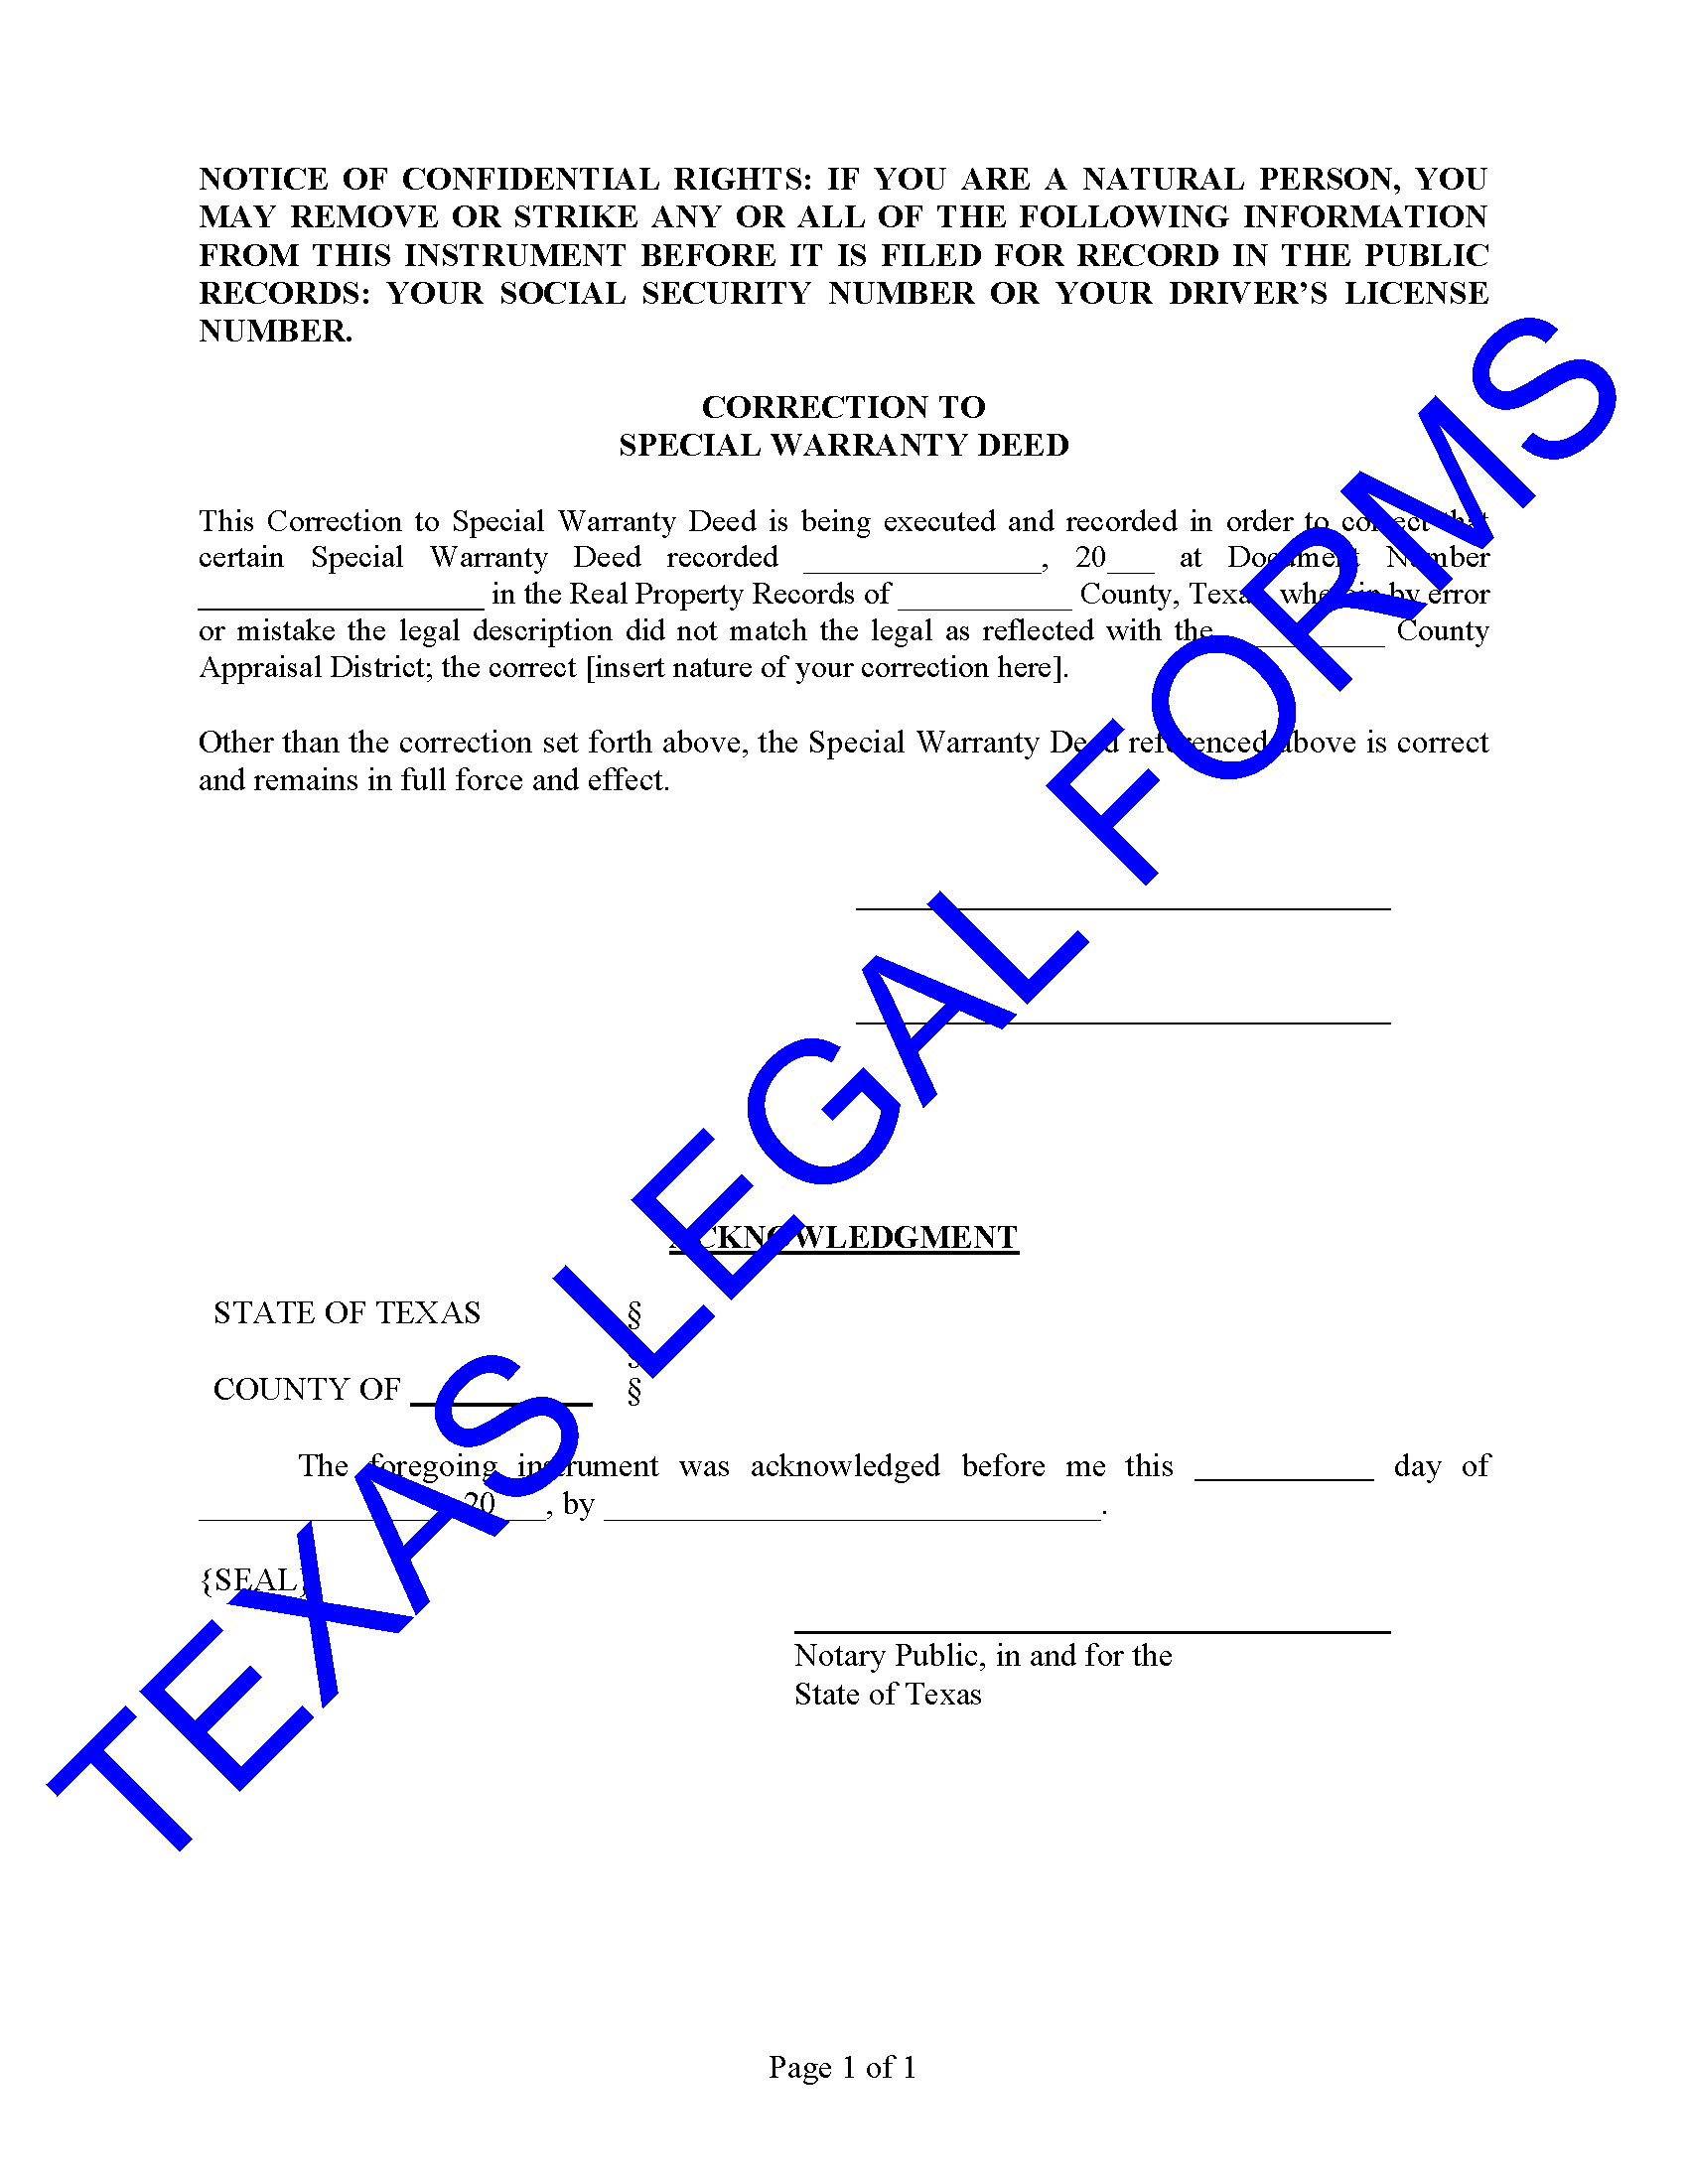 correction-deed-texas-legal-forms-by-david-goodhart-pllc